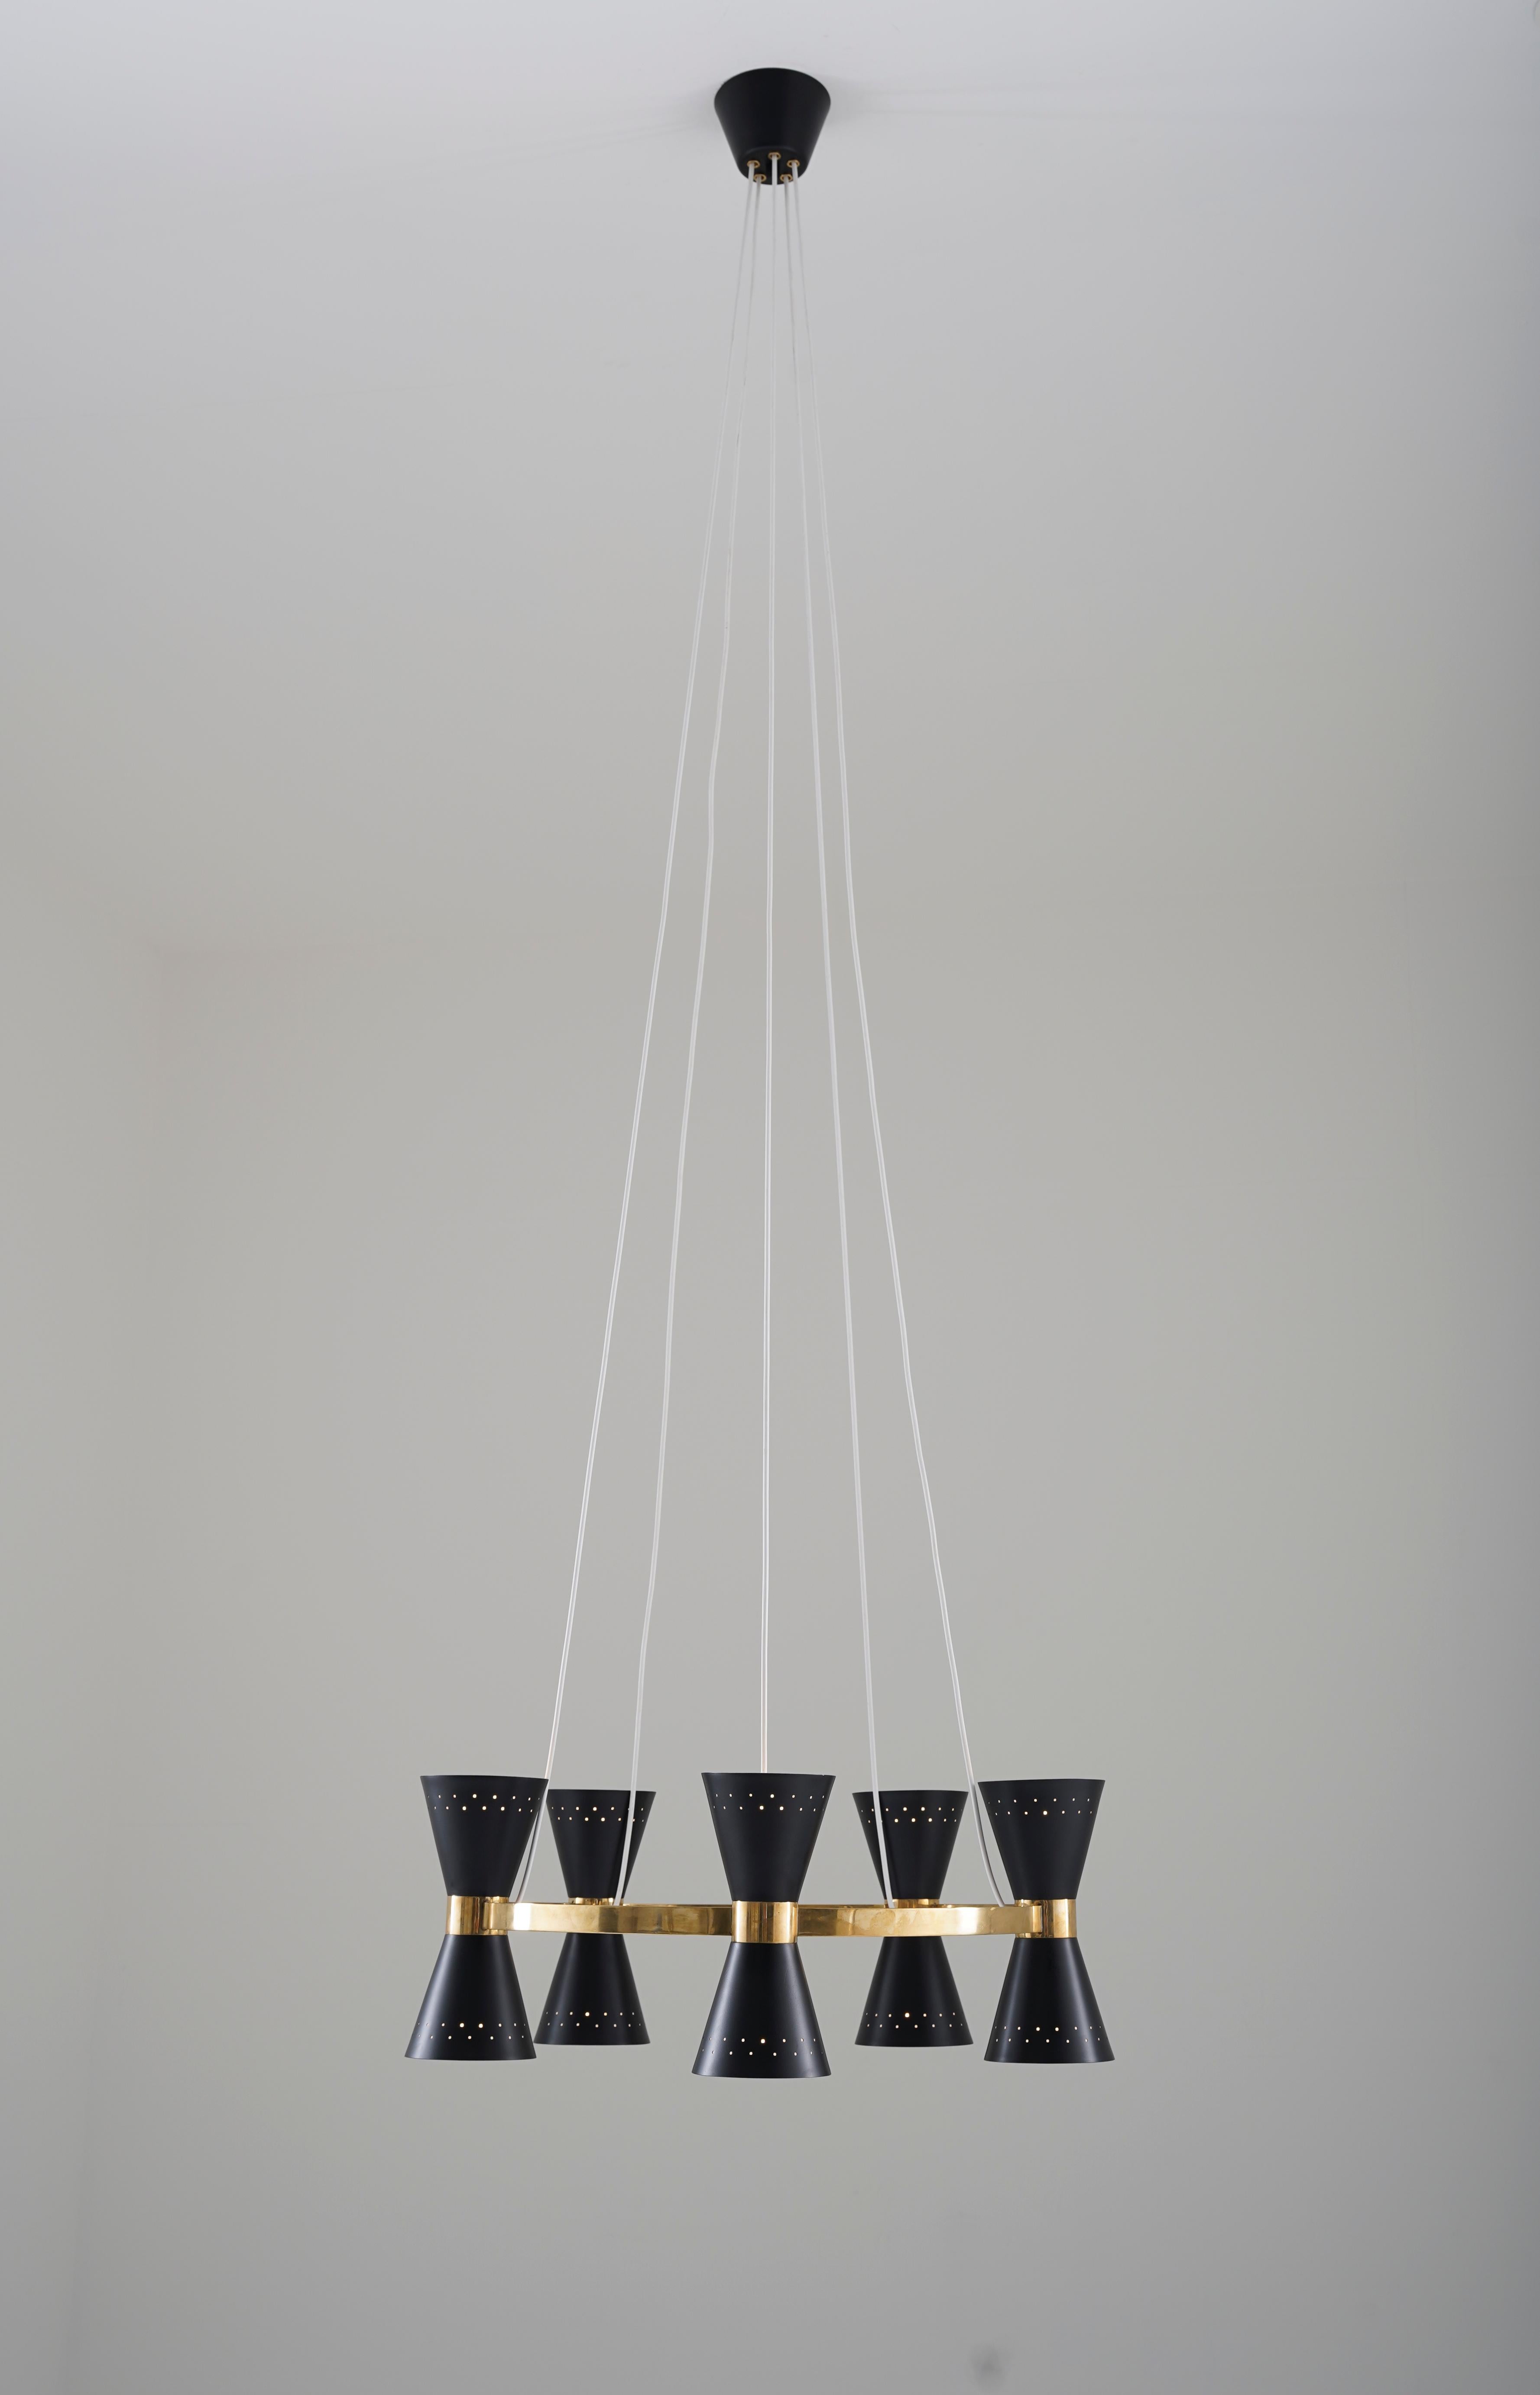 Rare chandelier by Alf Svensson for Bergboms, Sweden, 1950s.
This beautiful chandelier consists of a solid brass ring, supporting 10 cone-shaped perforated metal shades, each of them hiding a light source.

Condition: Very good restored